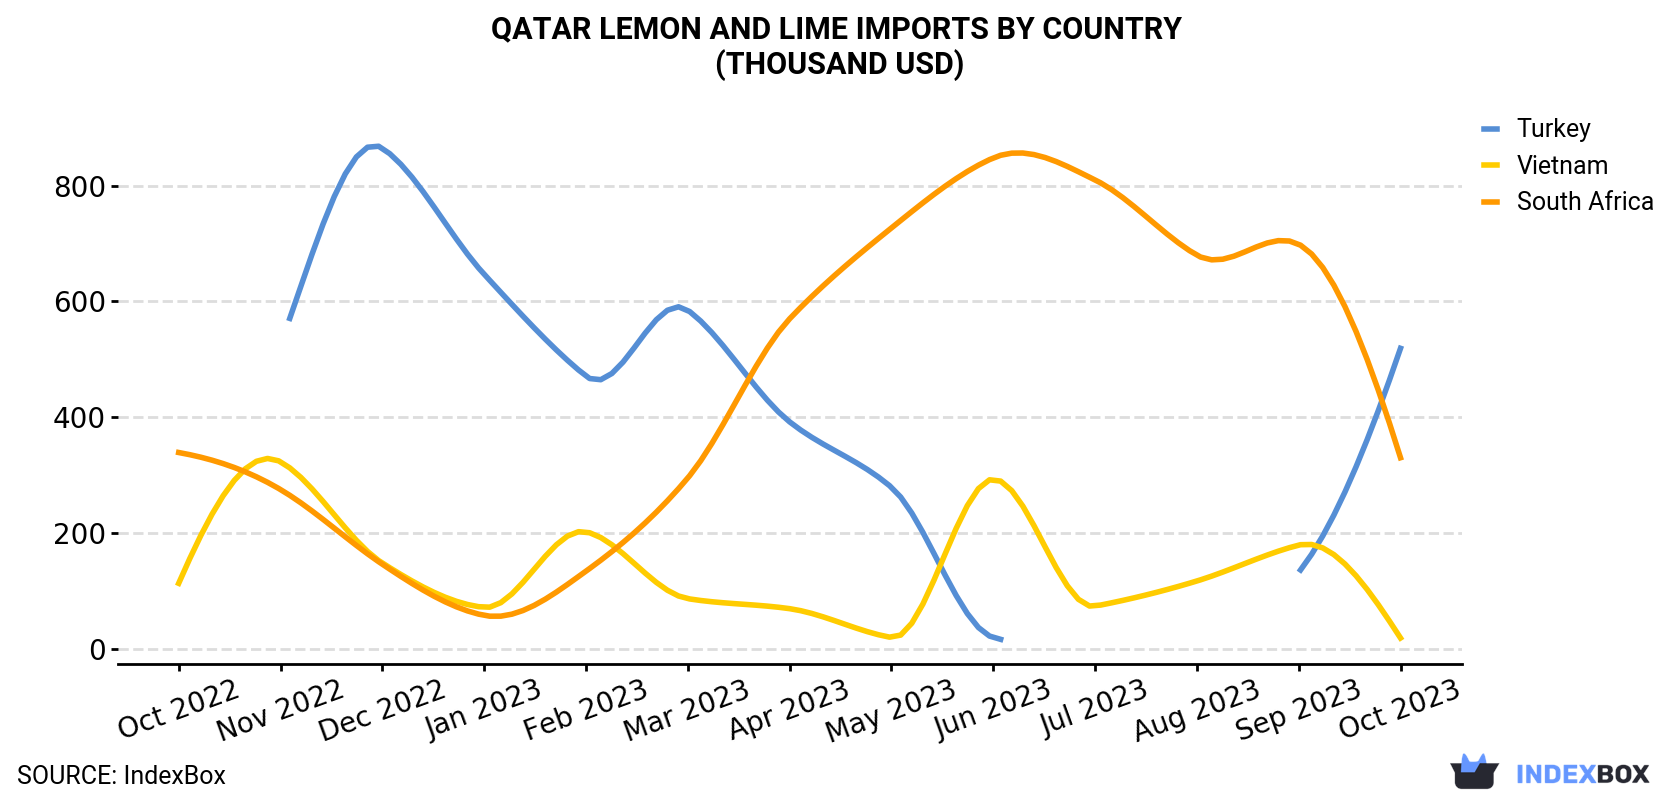 Qatar Lemon And Lime Imports By Country (Thousand USD)